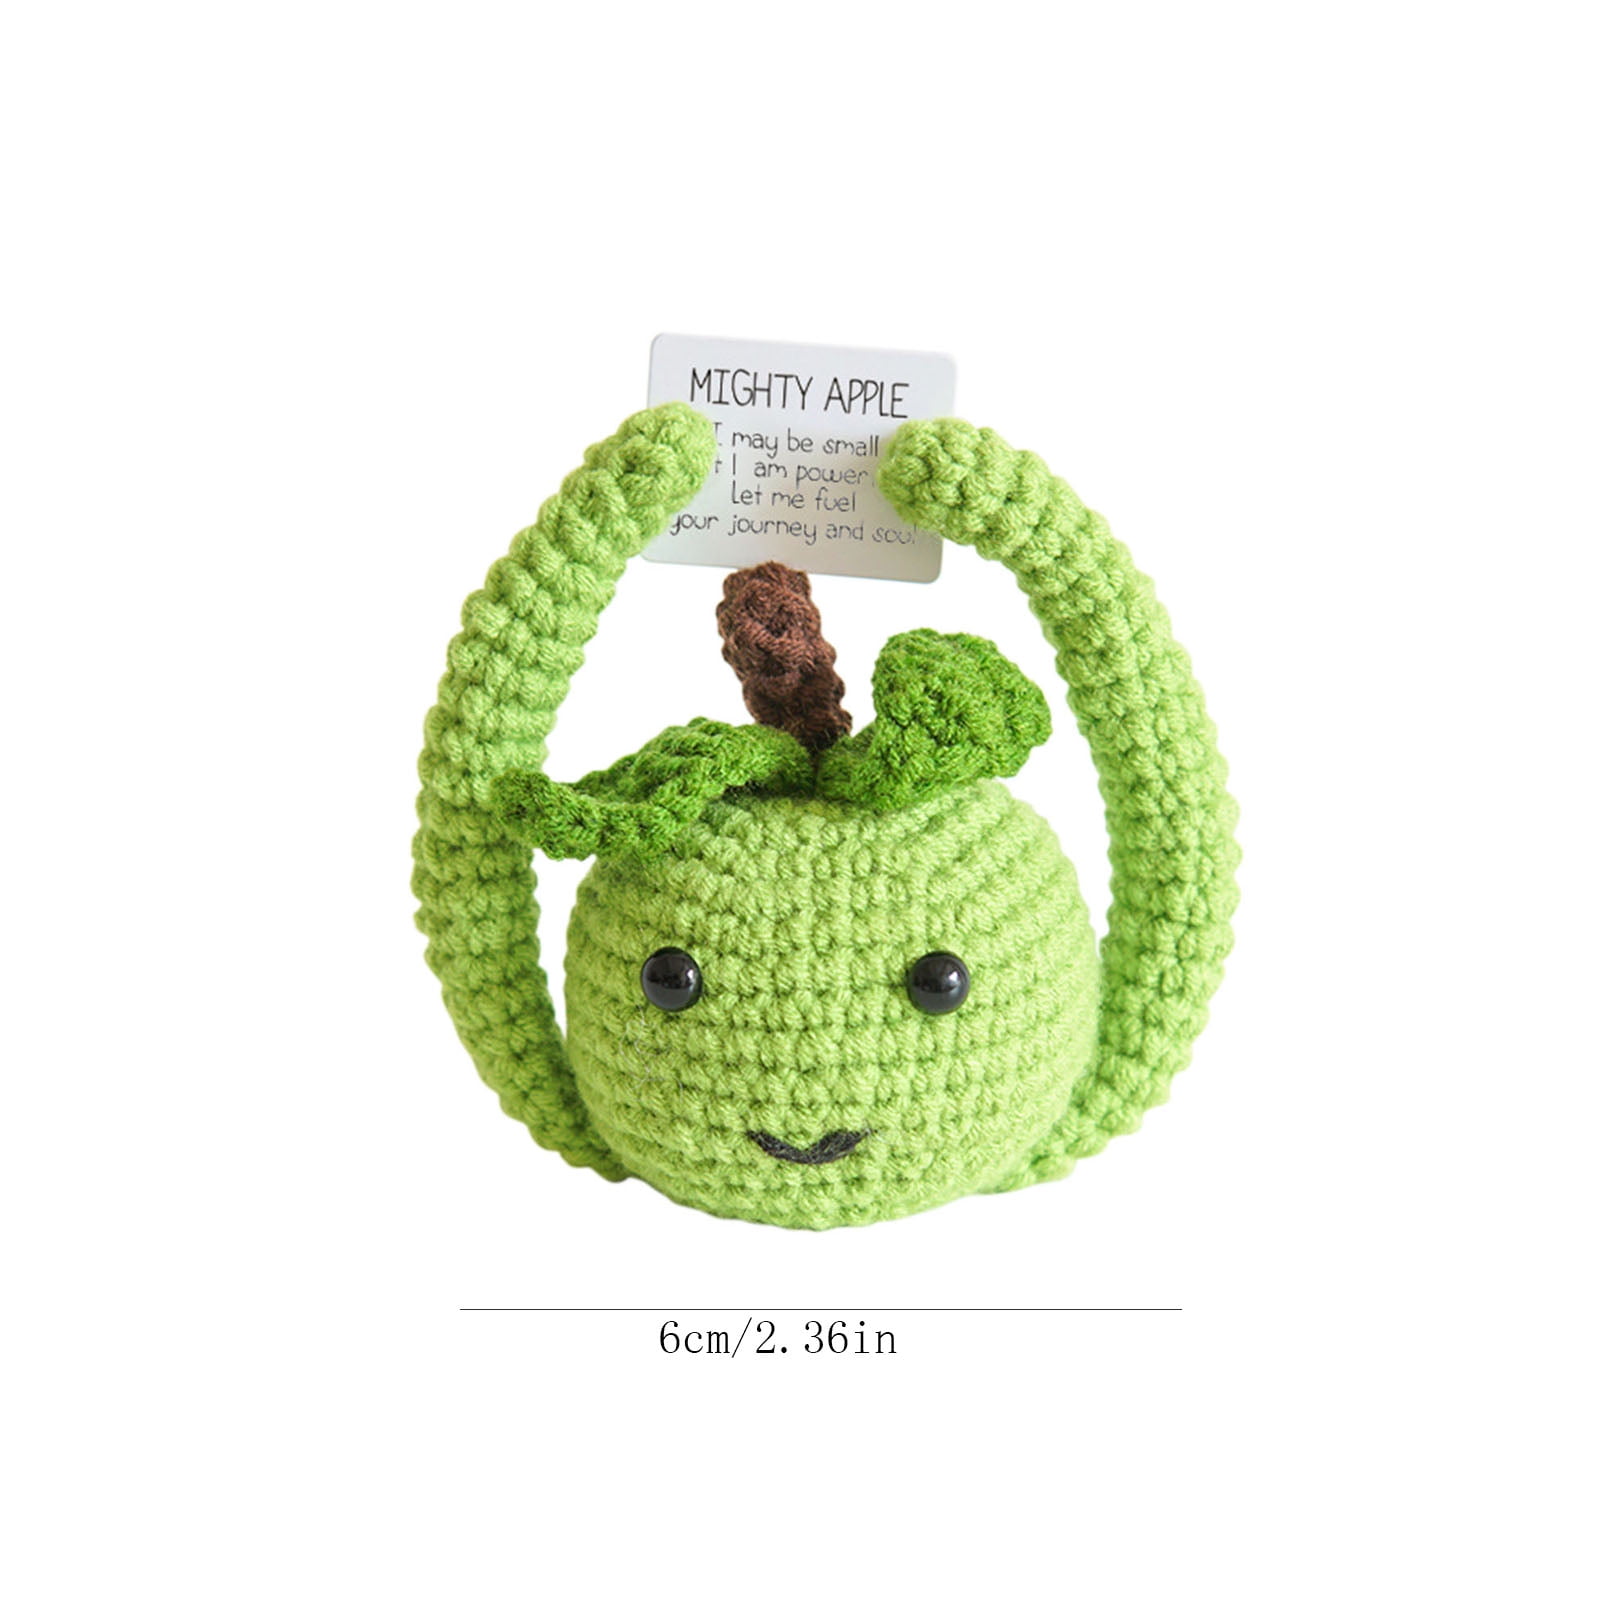 Handmade Emotional Support Pickled Cucumber Gift, Handmade Crochet  Emotional Support Pickles, Cute Crochet Pickled Cucumber Knitting Doll,  Christmas Pickle Ornament Xmas Gift 2024 - $5.49